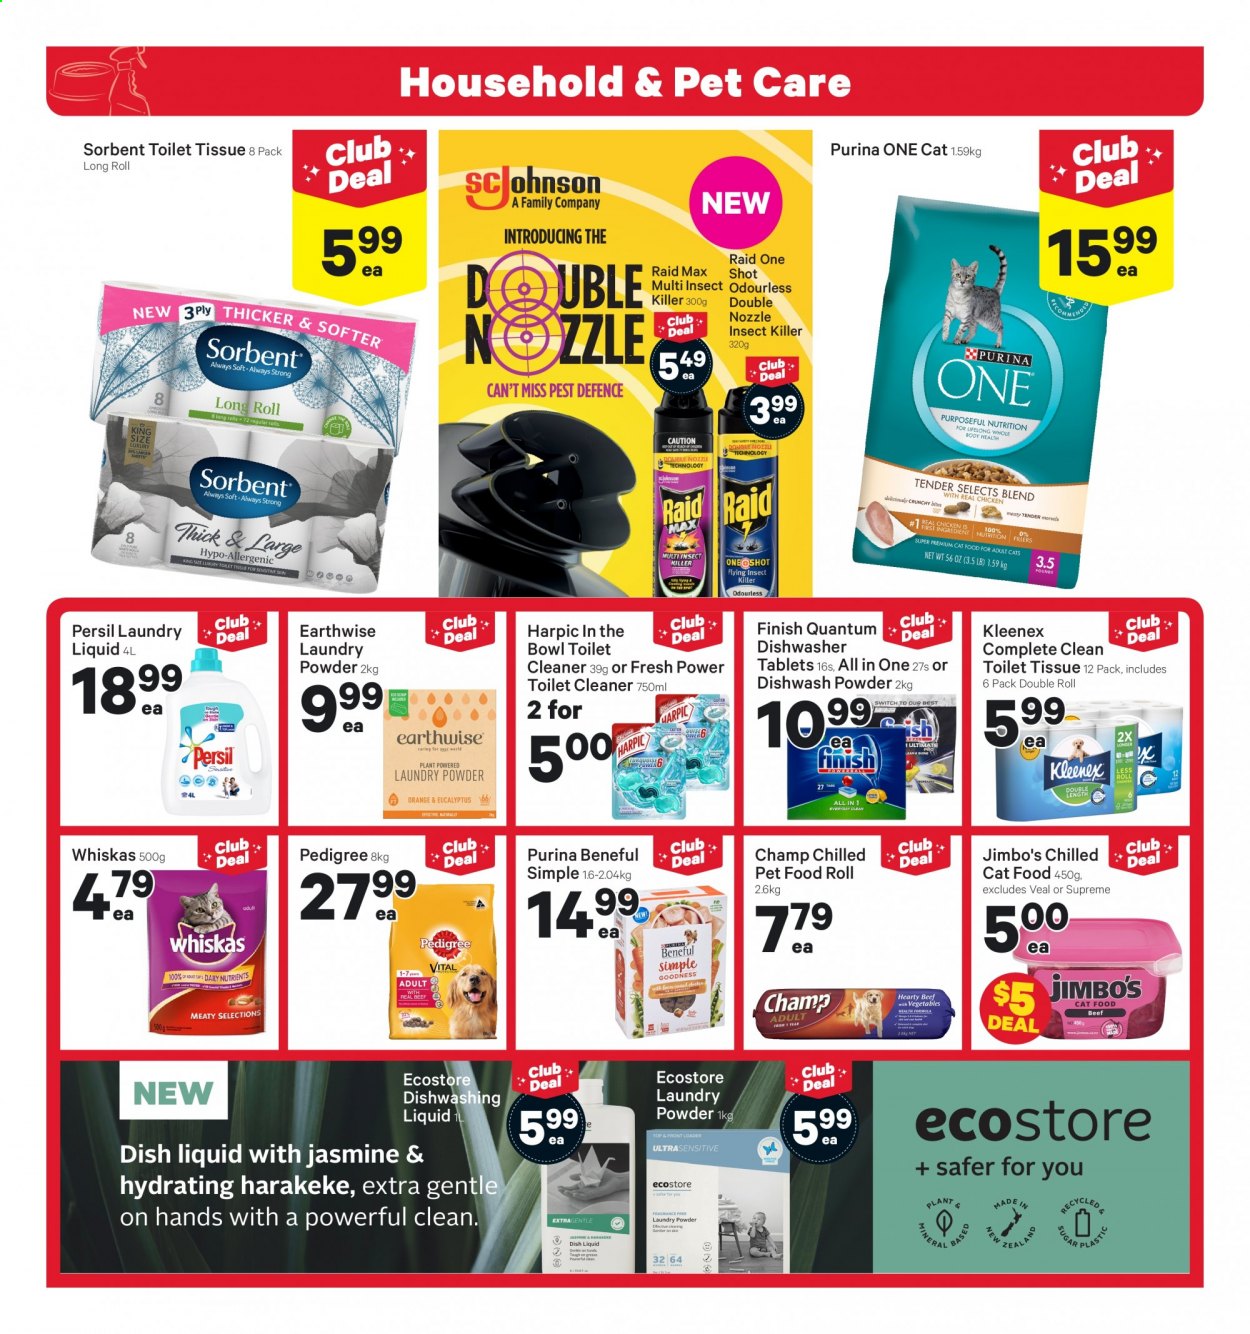 thumbnail - New World mailer - 22.02.2021 - 28.02.2021 - Sales products - veal meat, Kleenex, toilet paper, tissues, Whiskas, dishwashing liquid, insect killer, cleaner, laundry detergent, laundry powder, toilet cleaner. Page 17.